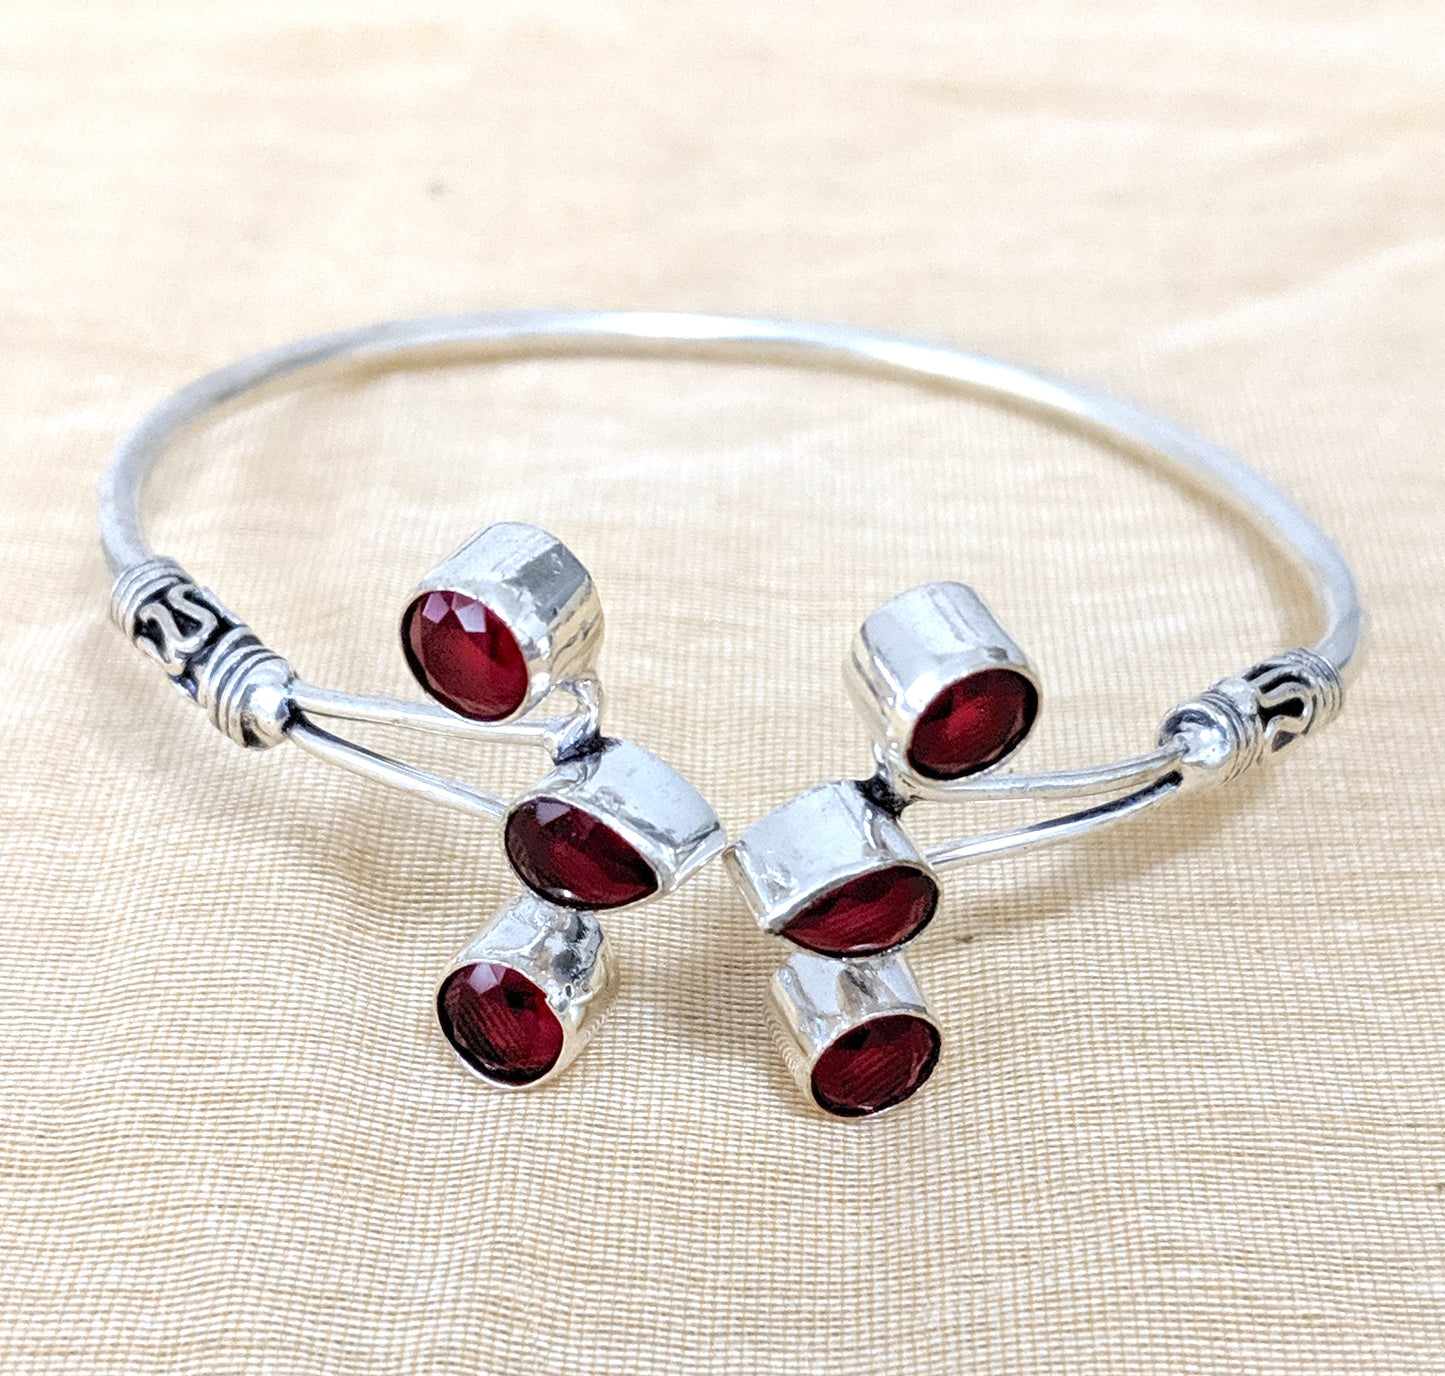 Bright silver finish adjustable bangle bracelet with color stone - Simpliful